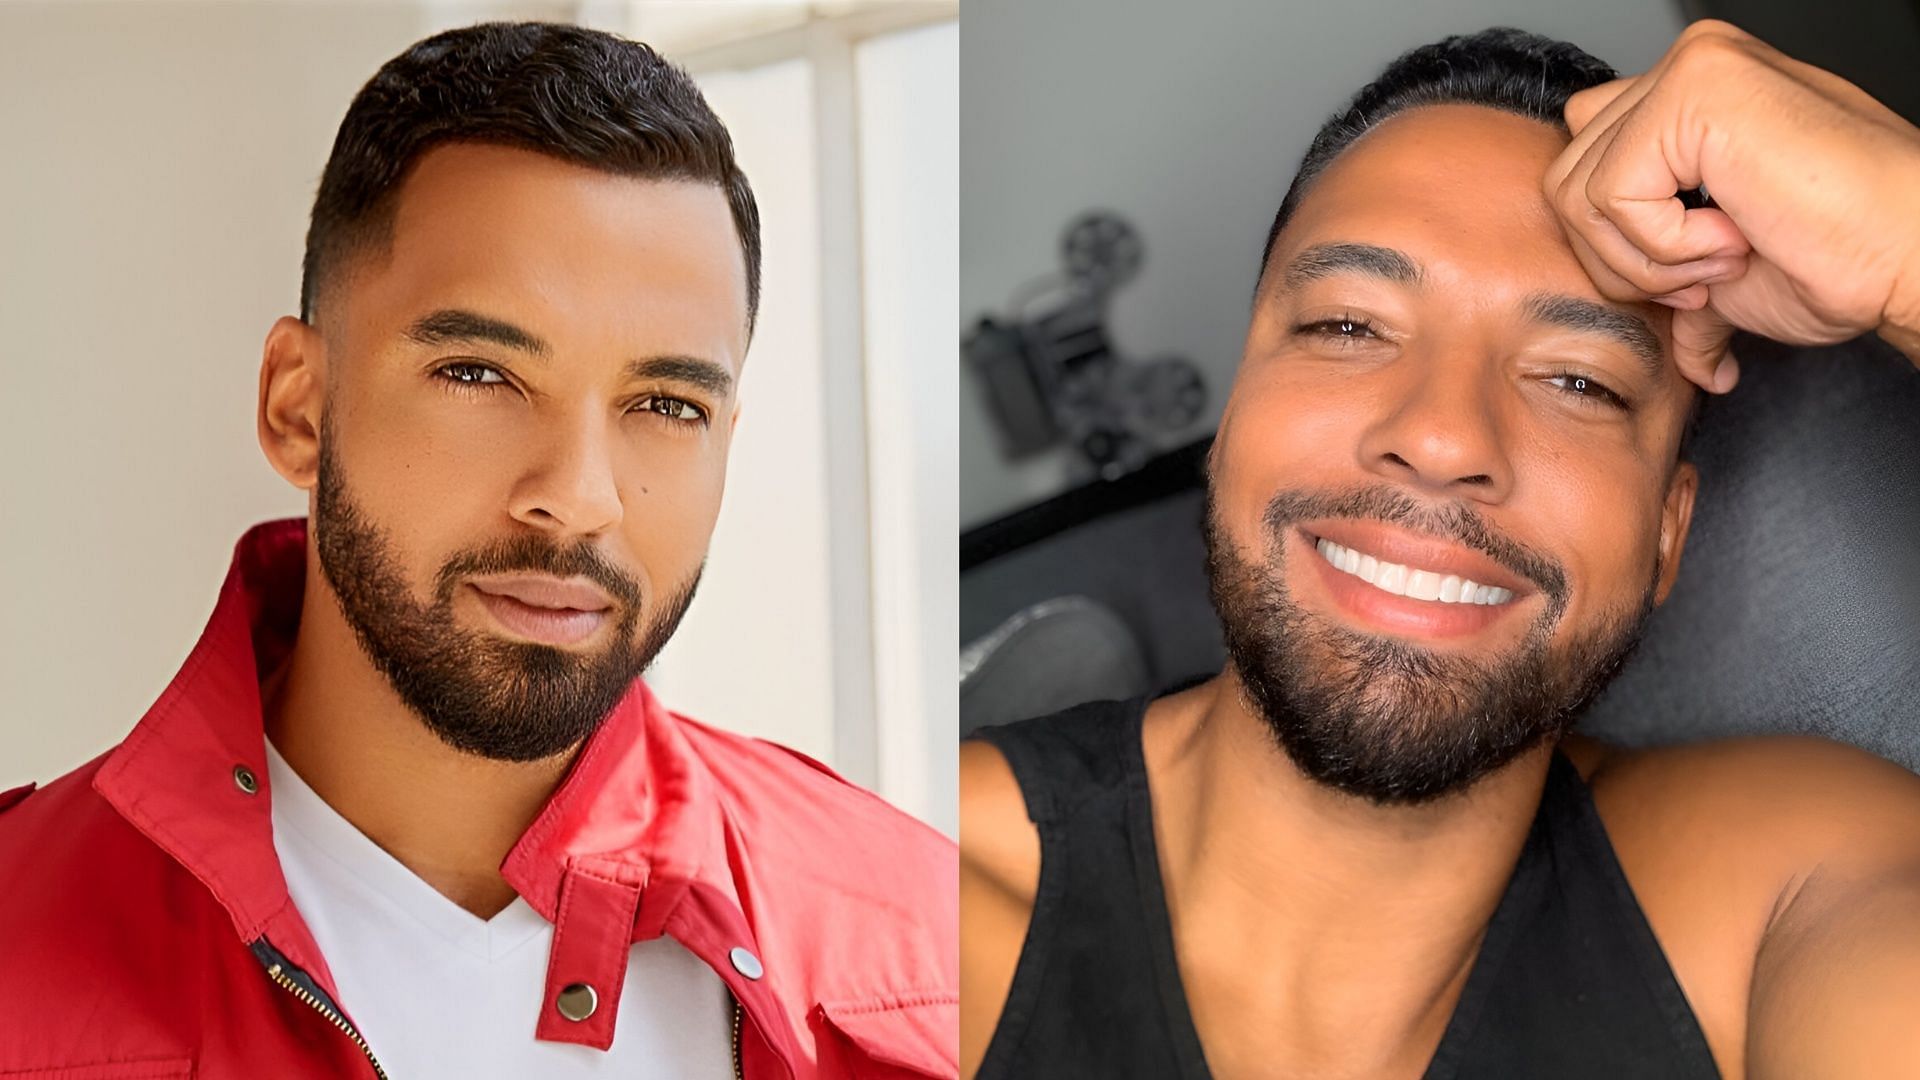 Christian Keyes leaves the internet divided as he leaves everyone guessing the identity of his alleged harasser. (Image via Facebook/Christian Keyes)